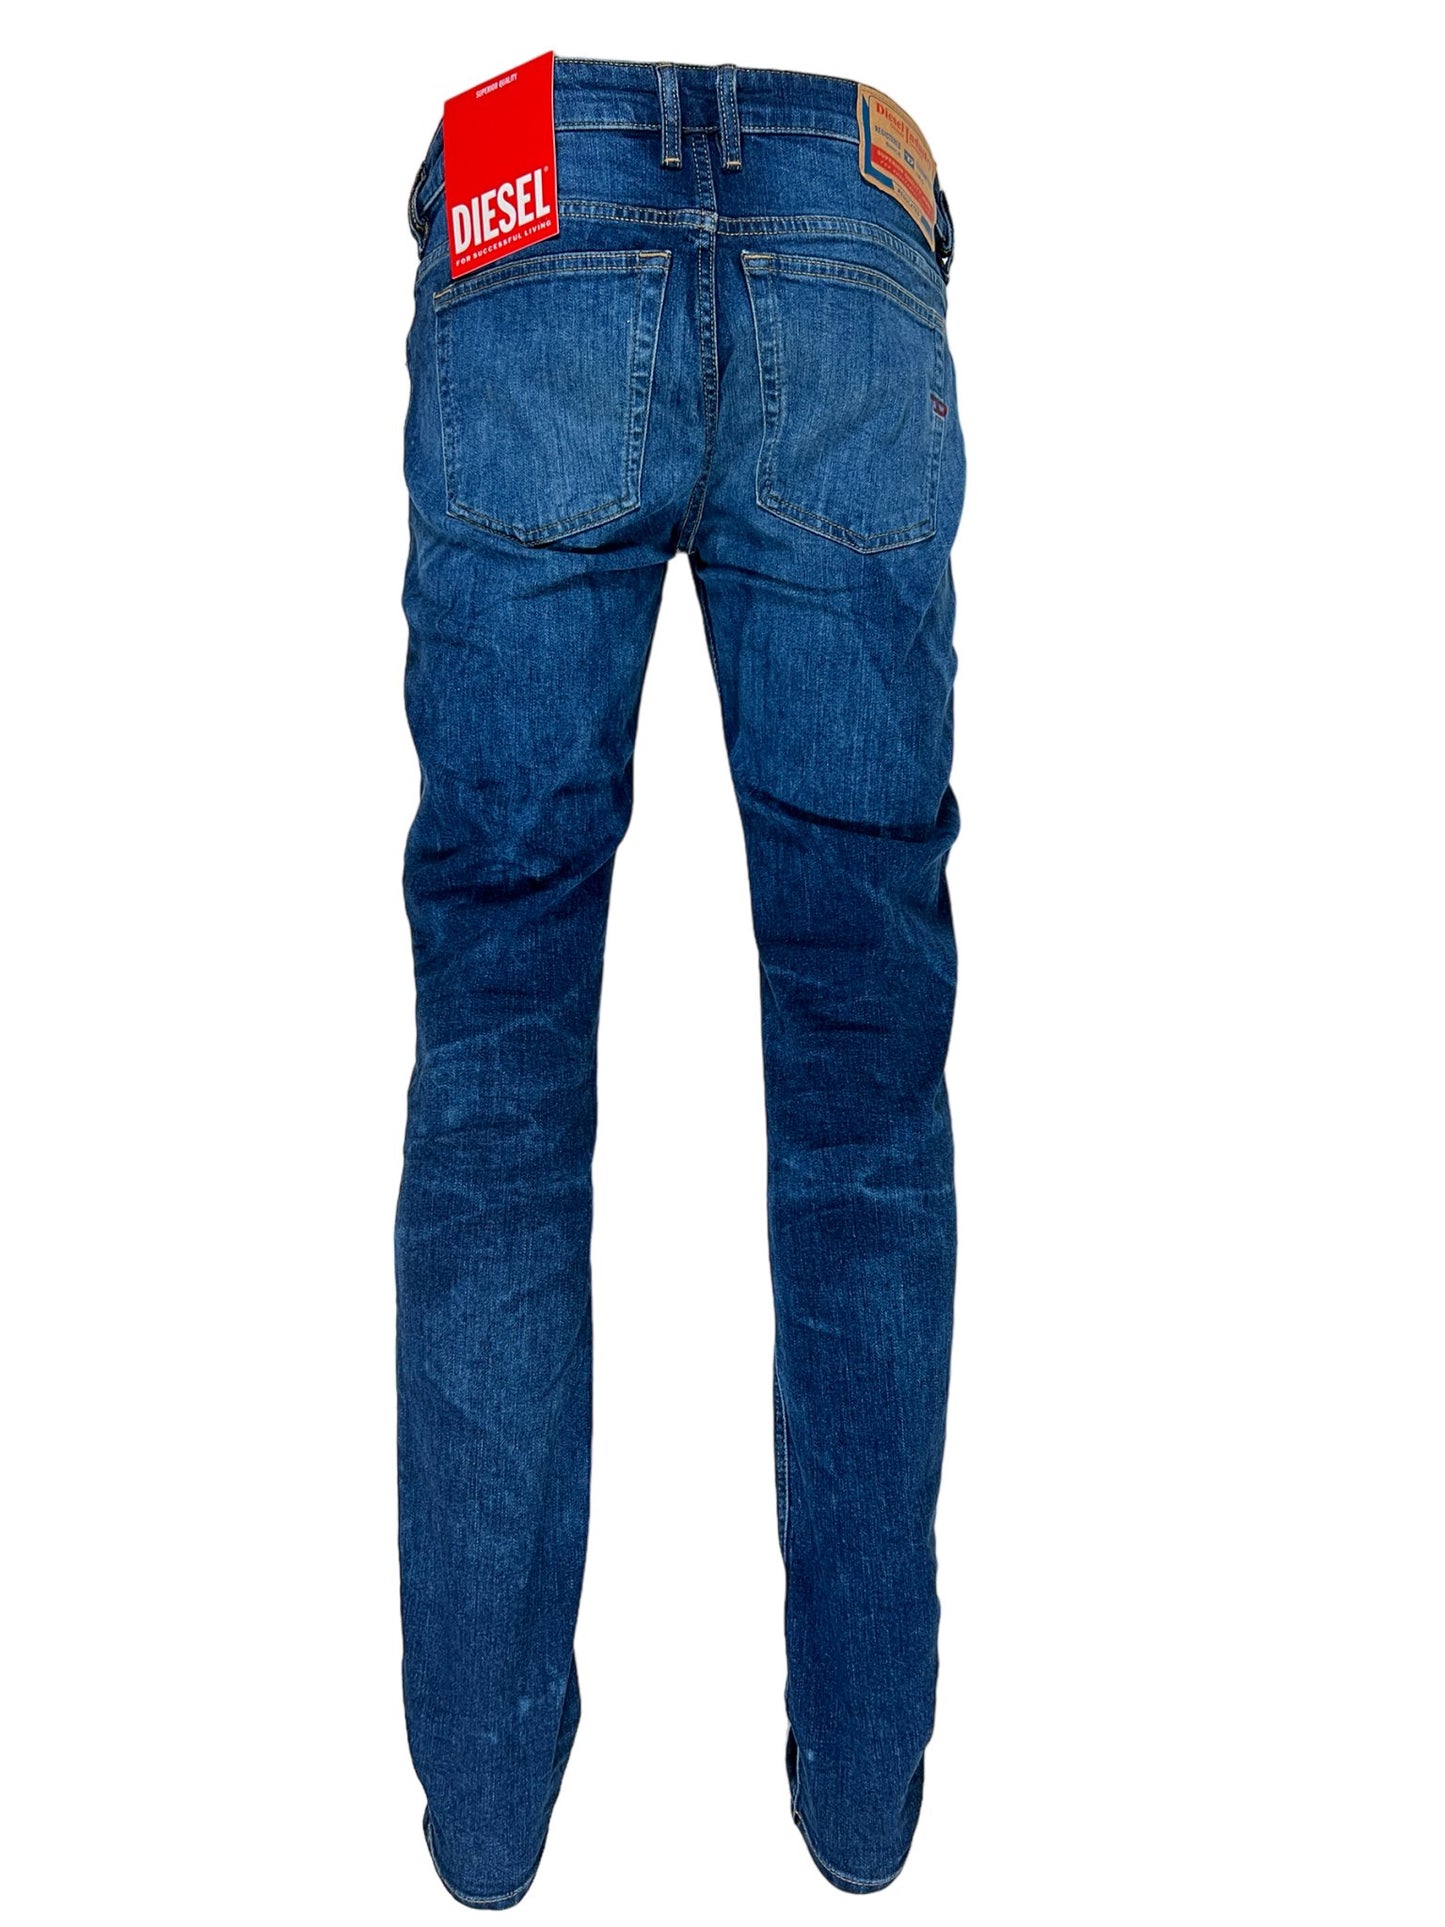 A pair of DIESEL 1979 SLEENKER PFAU DENIM skinny style jeans with a red tag on the back.